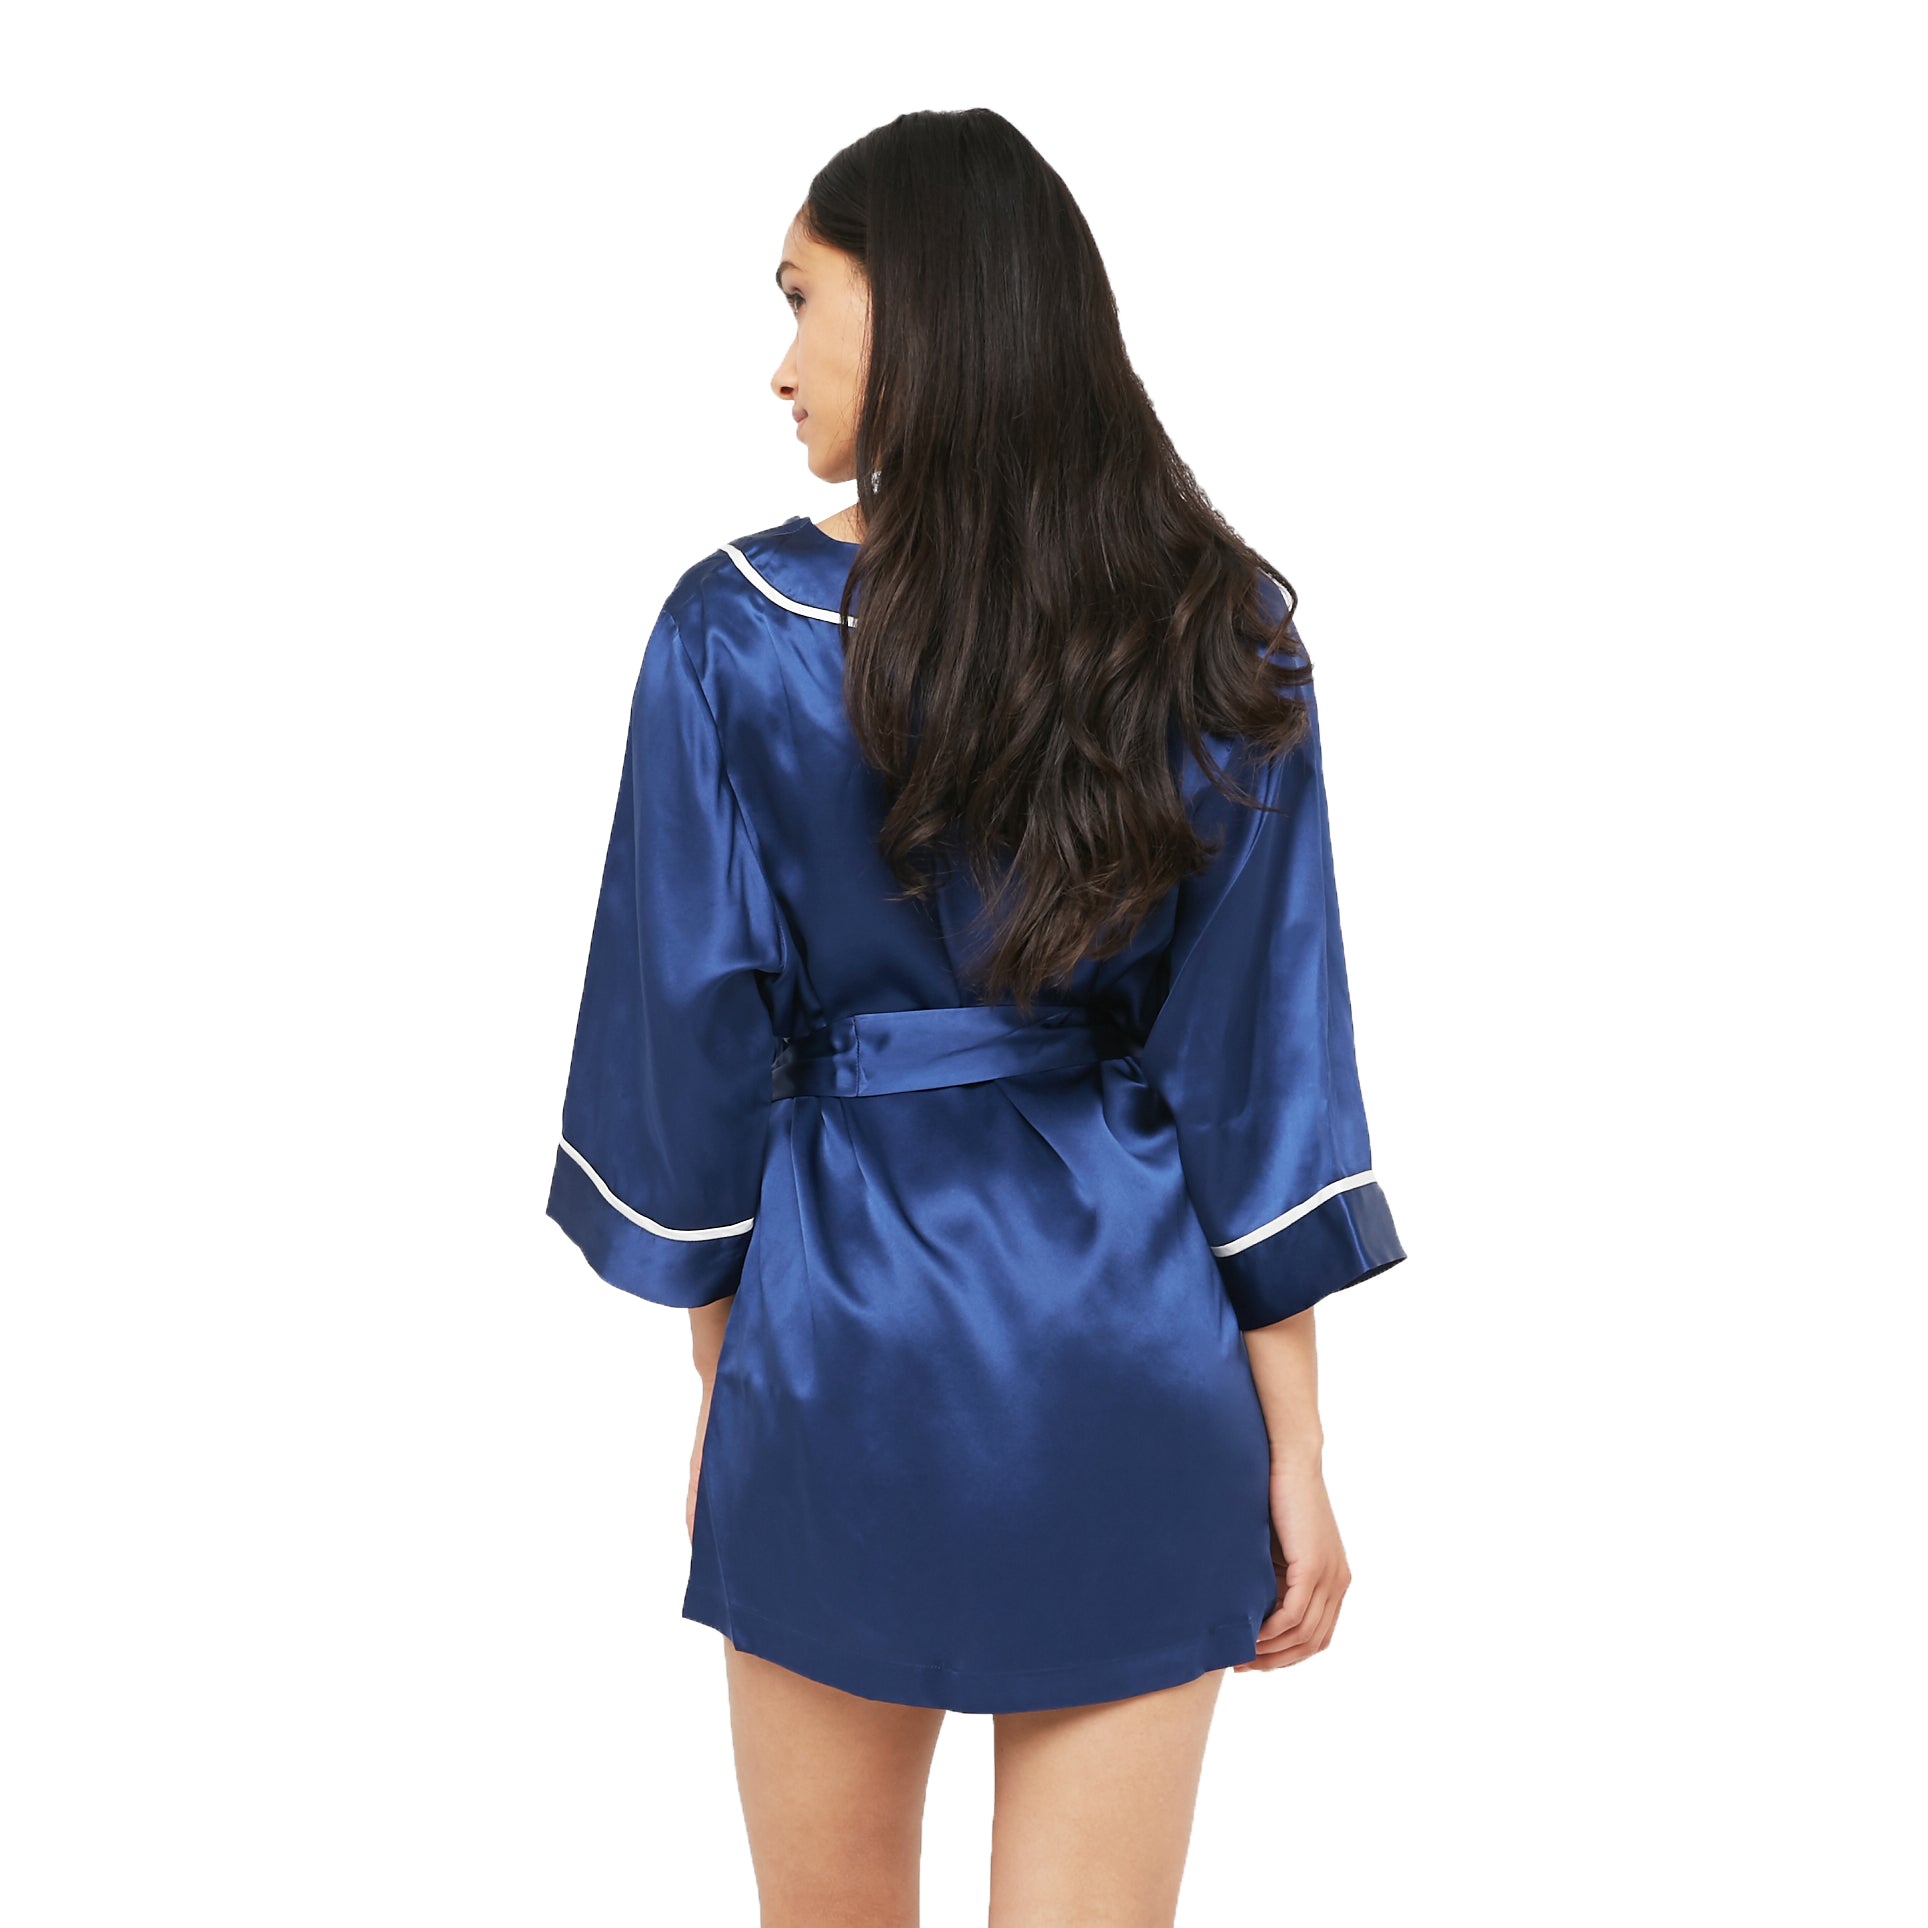 Classic Silk Robe with Contrast Piping - MYK Silk #style_kimono style #color_navy blue